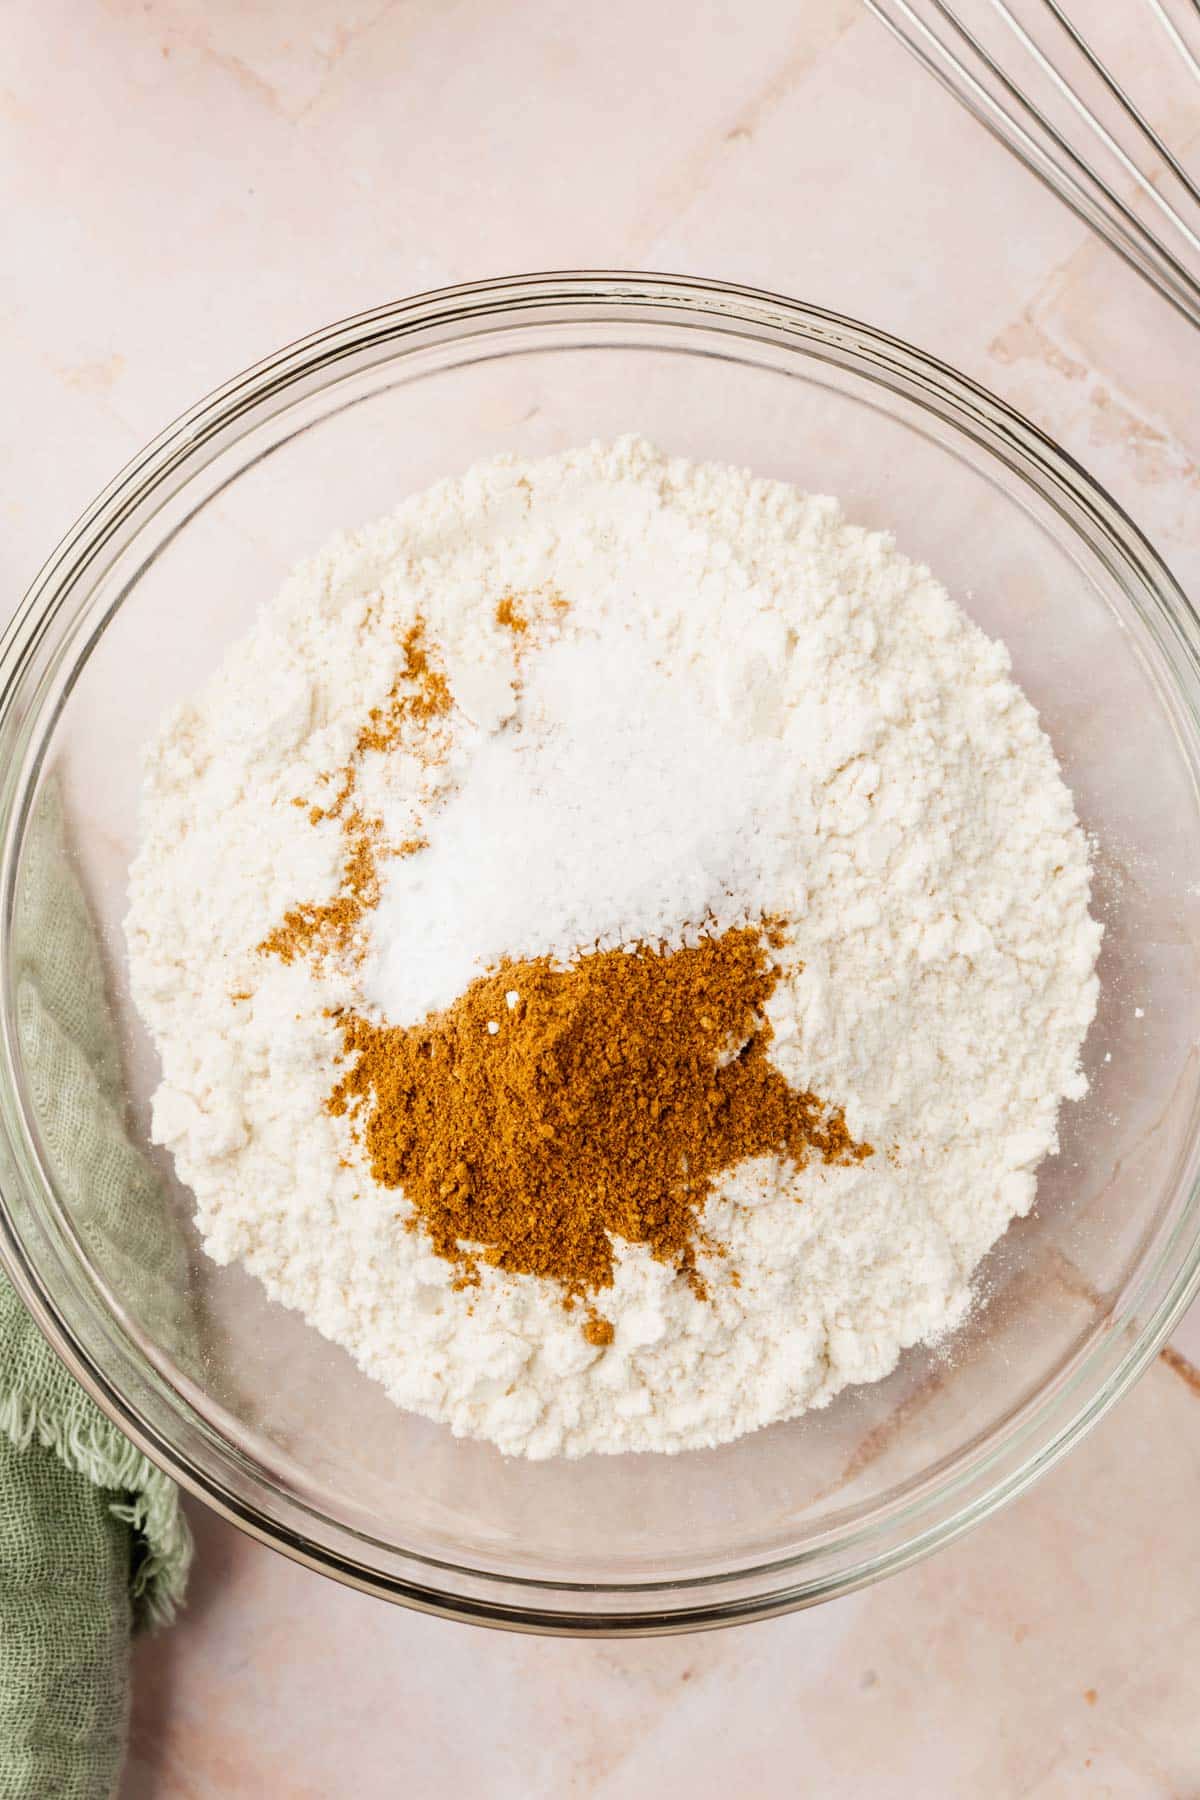 A glass mixing bowl with gluten-free flour, baking soda, baking powder, and pumpkin spice in it before mixing together.